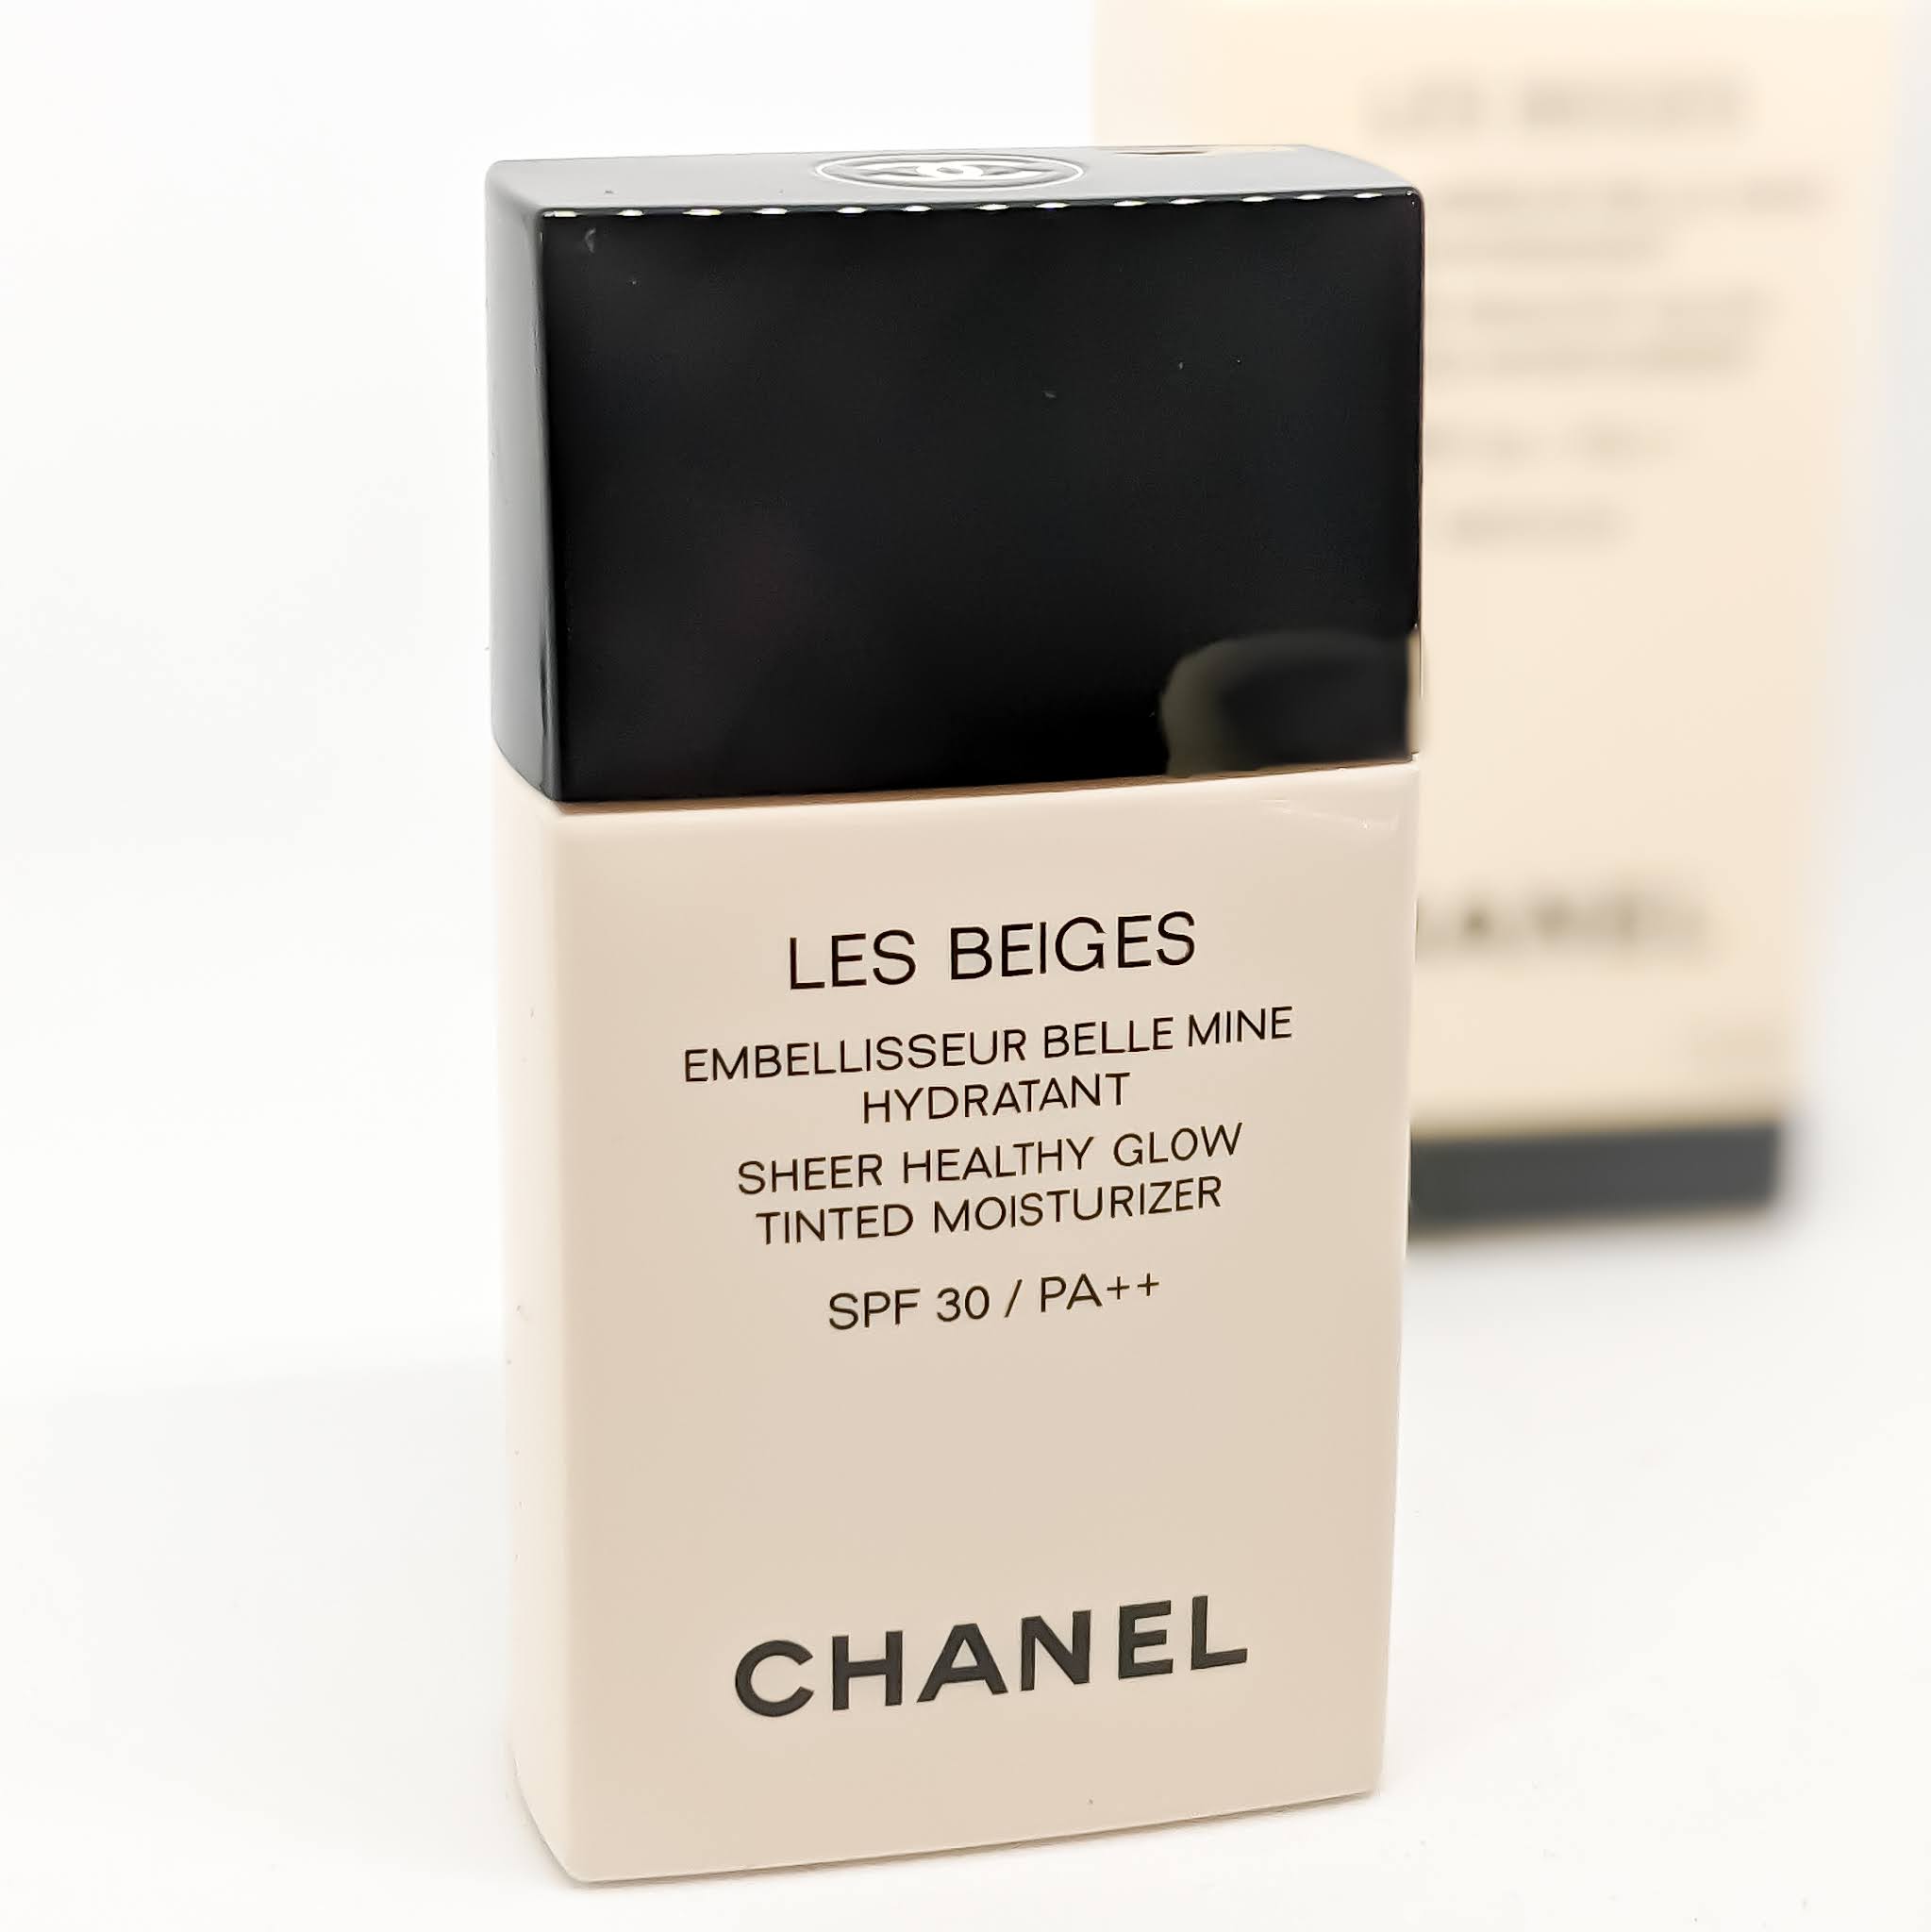 chanel les beiges pearly glow